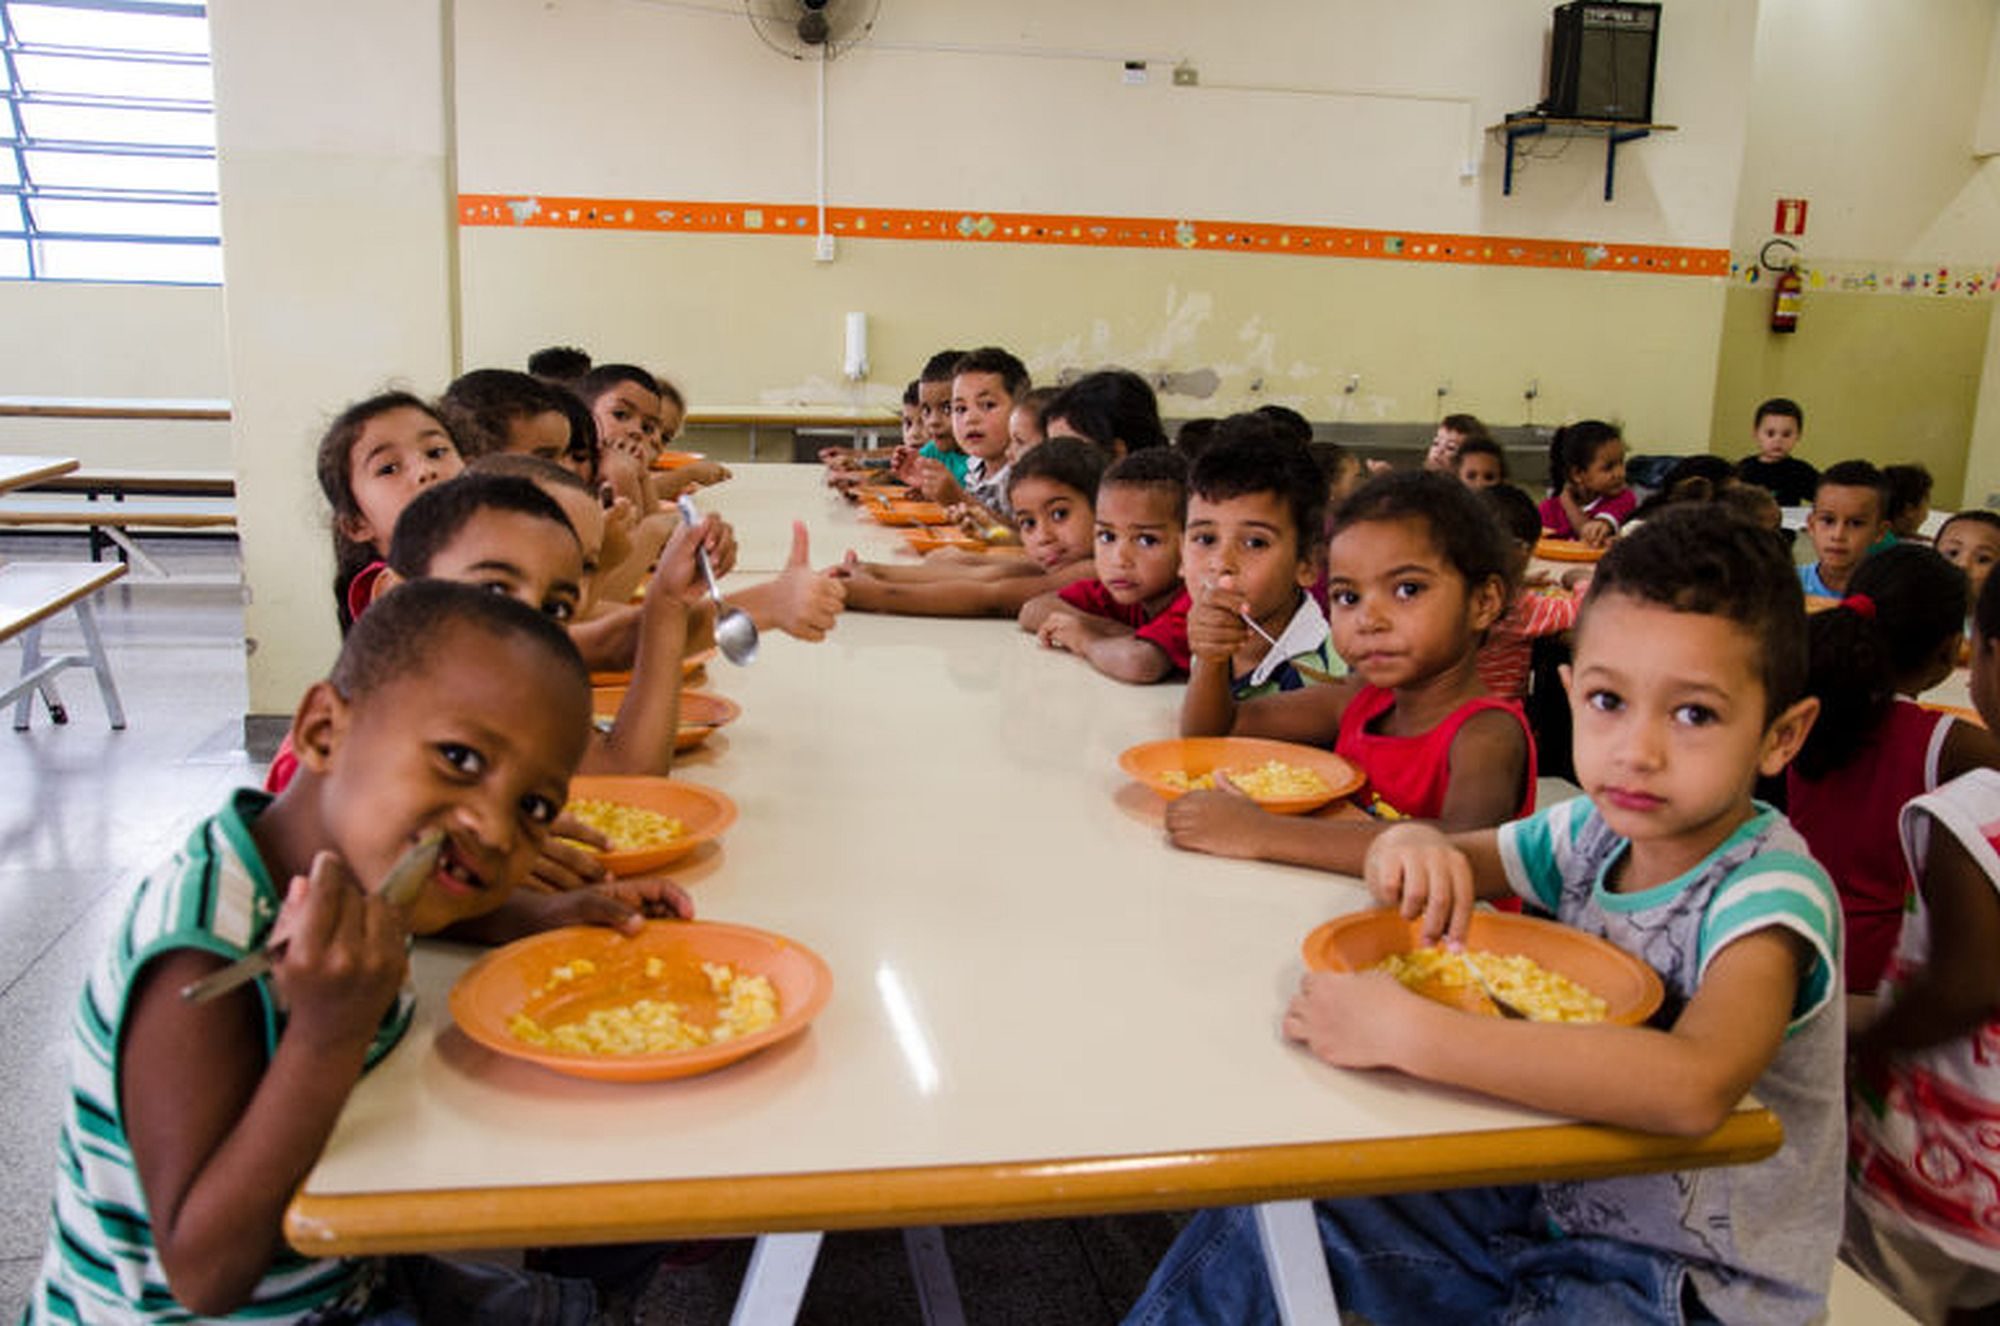 Brazilian children at school at lunchtime.